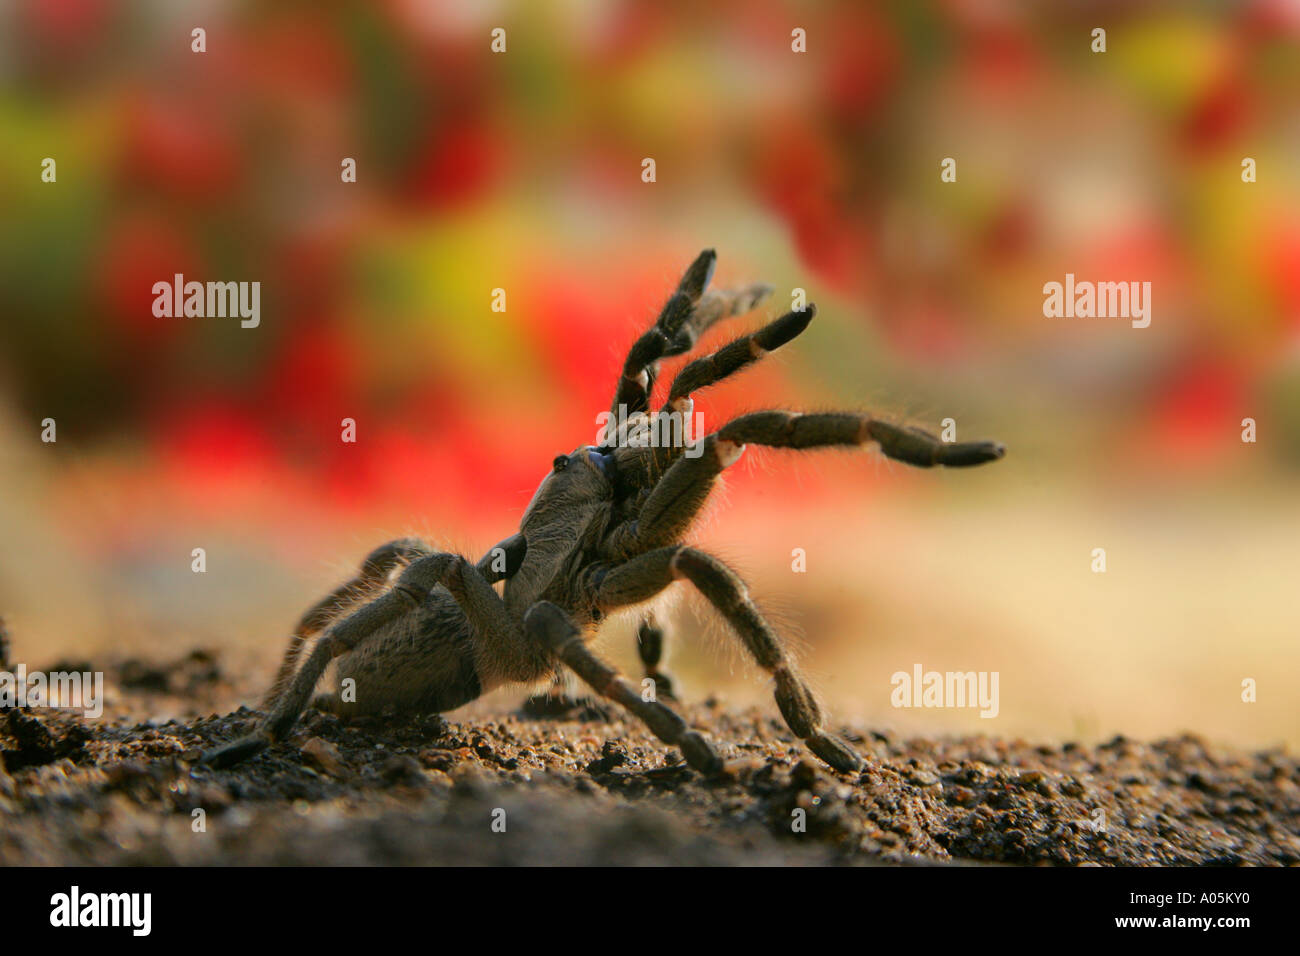 Horned Baboon Spider, South Africa Stock Photo